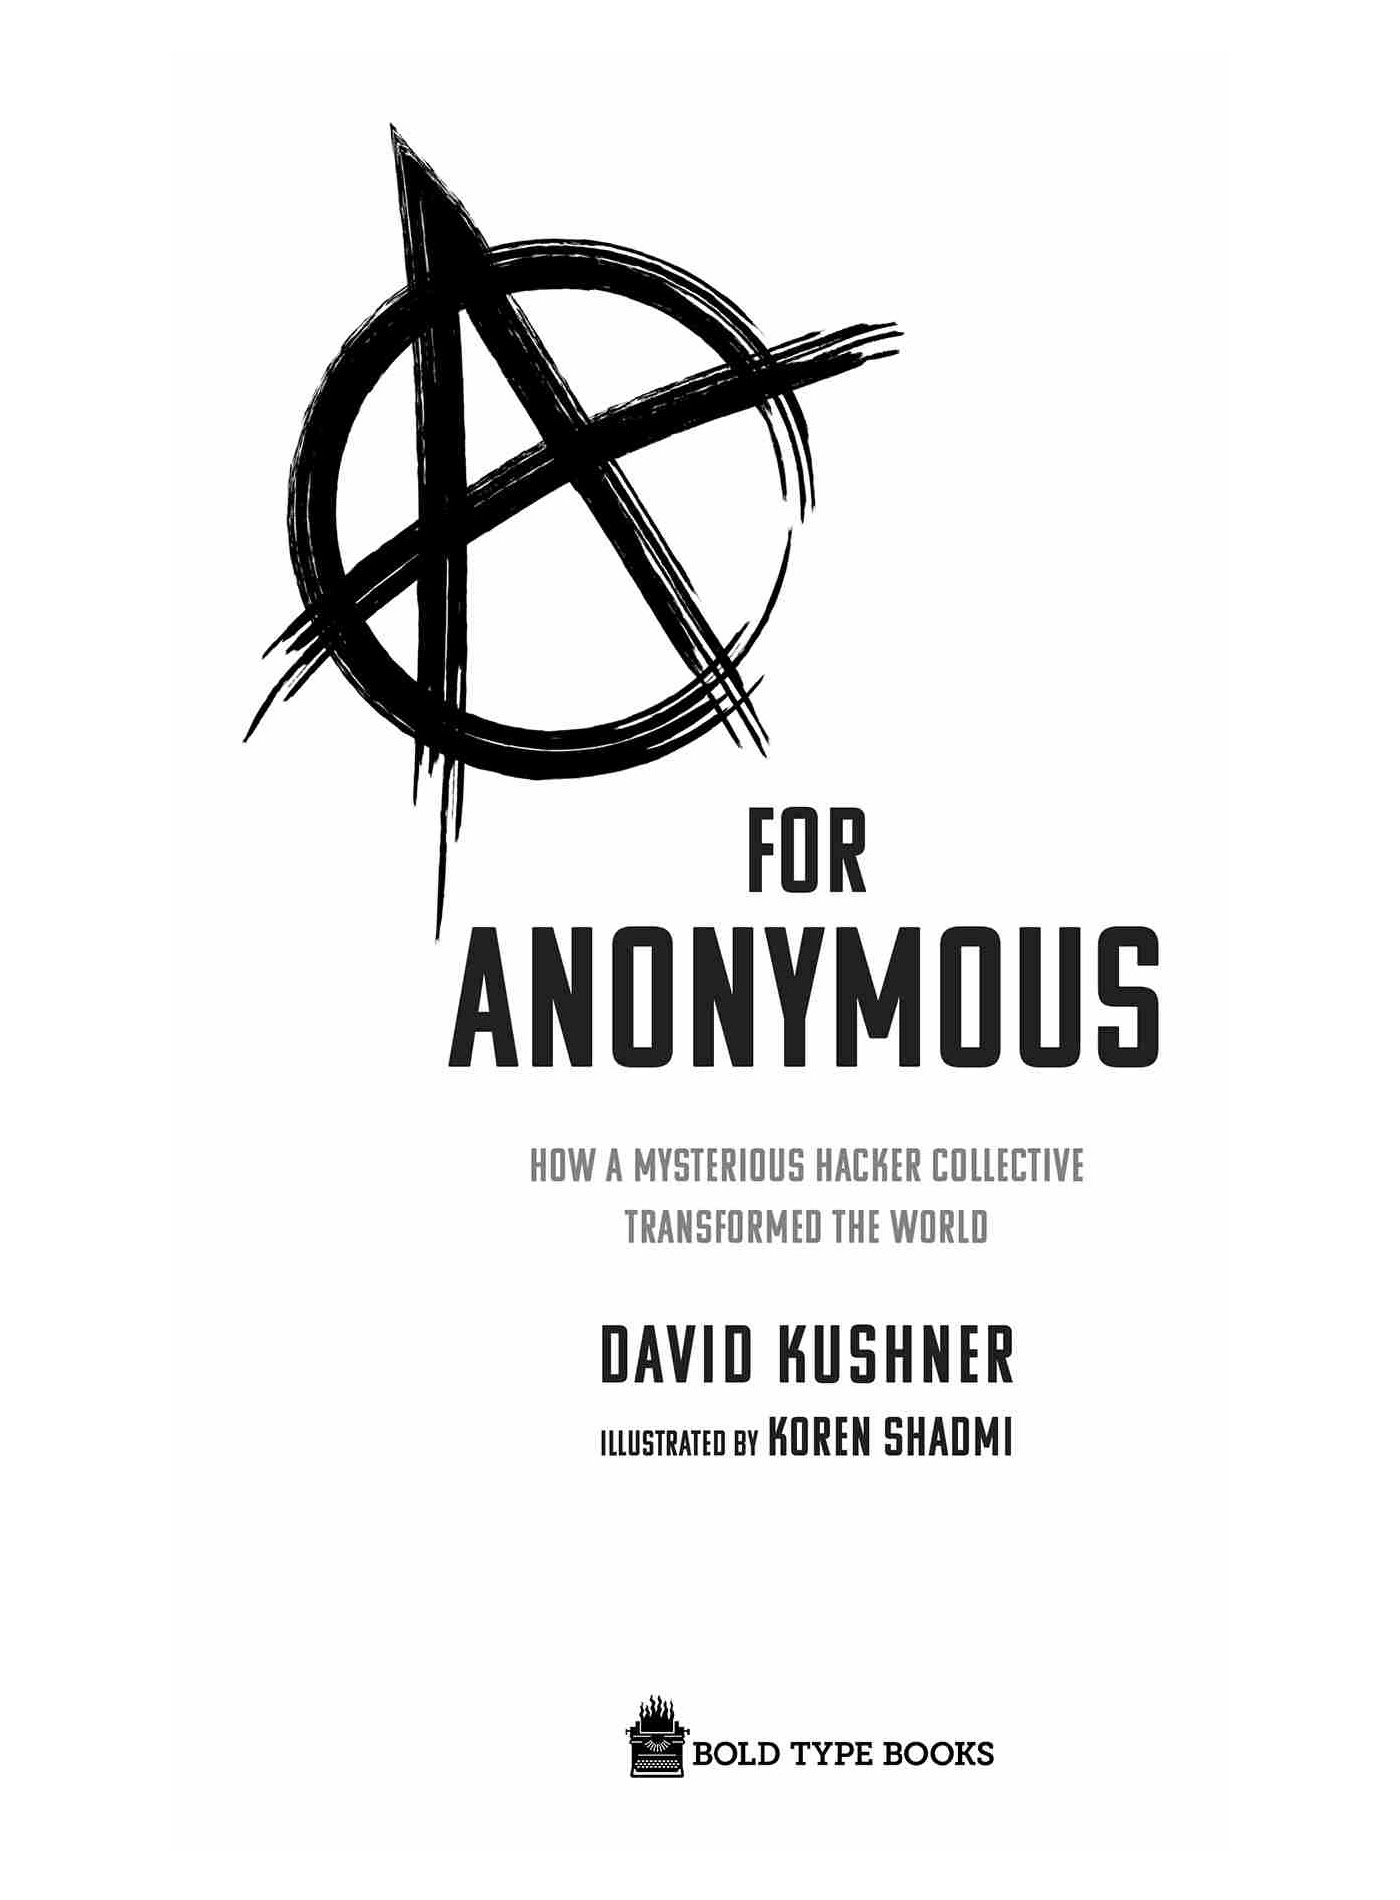 Read online A for Anonymous: How a Mysterious Hacker Collective Transformed the World comic -  Issue # TPB - 4